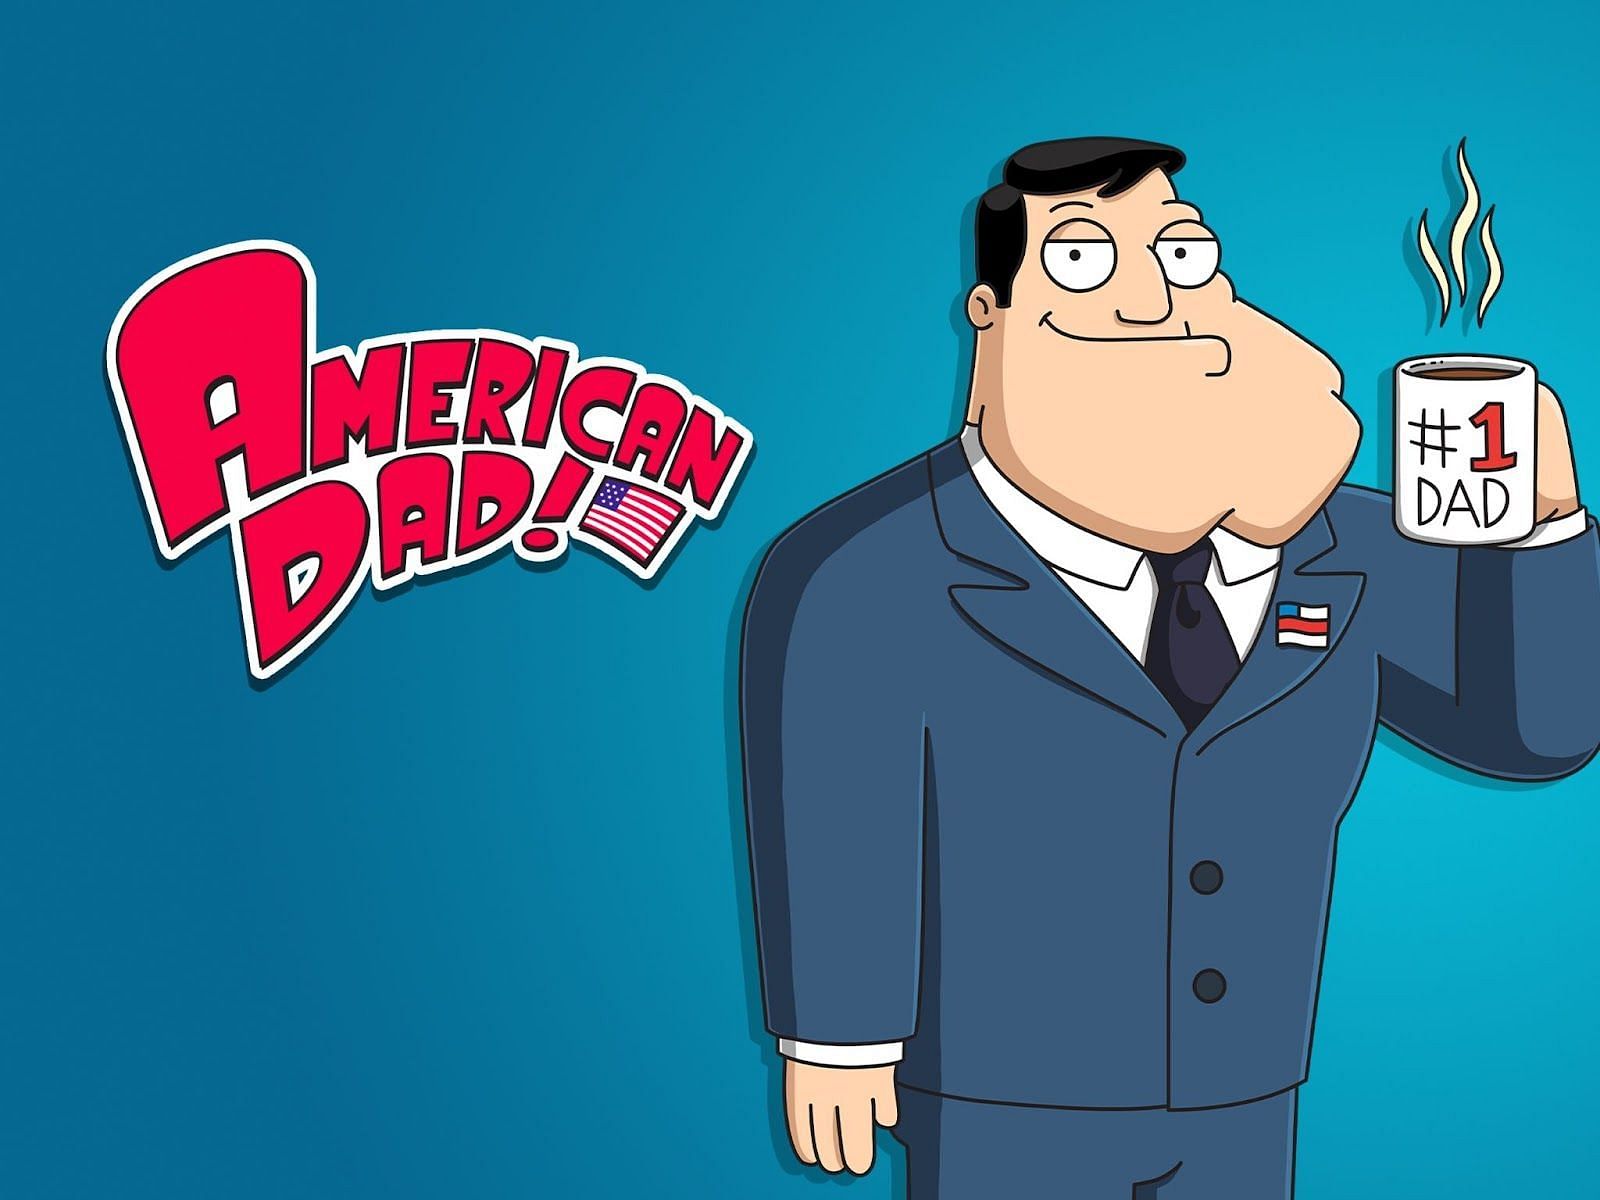 List of American Dad characters